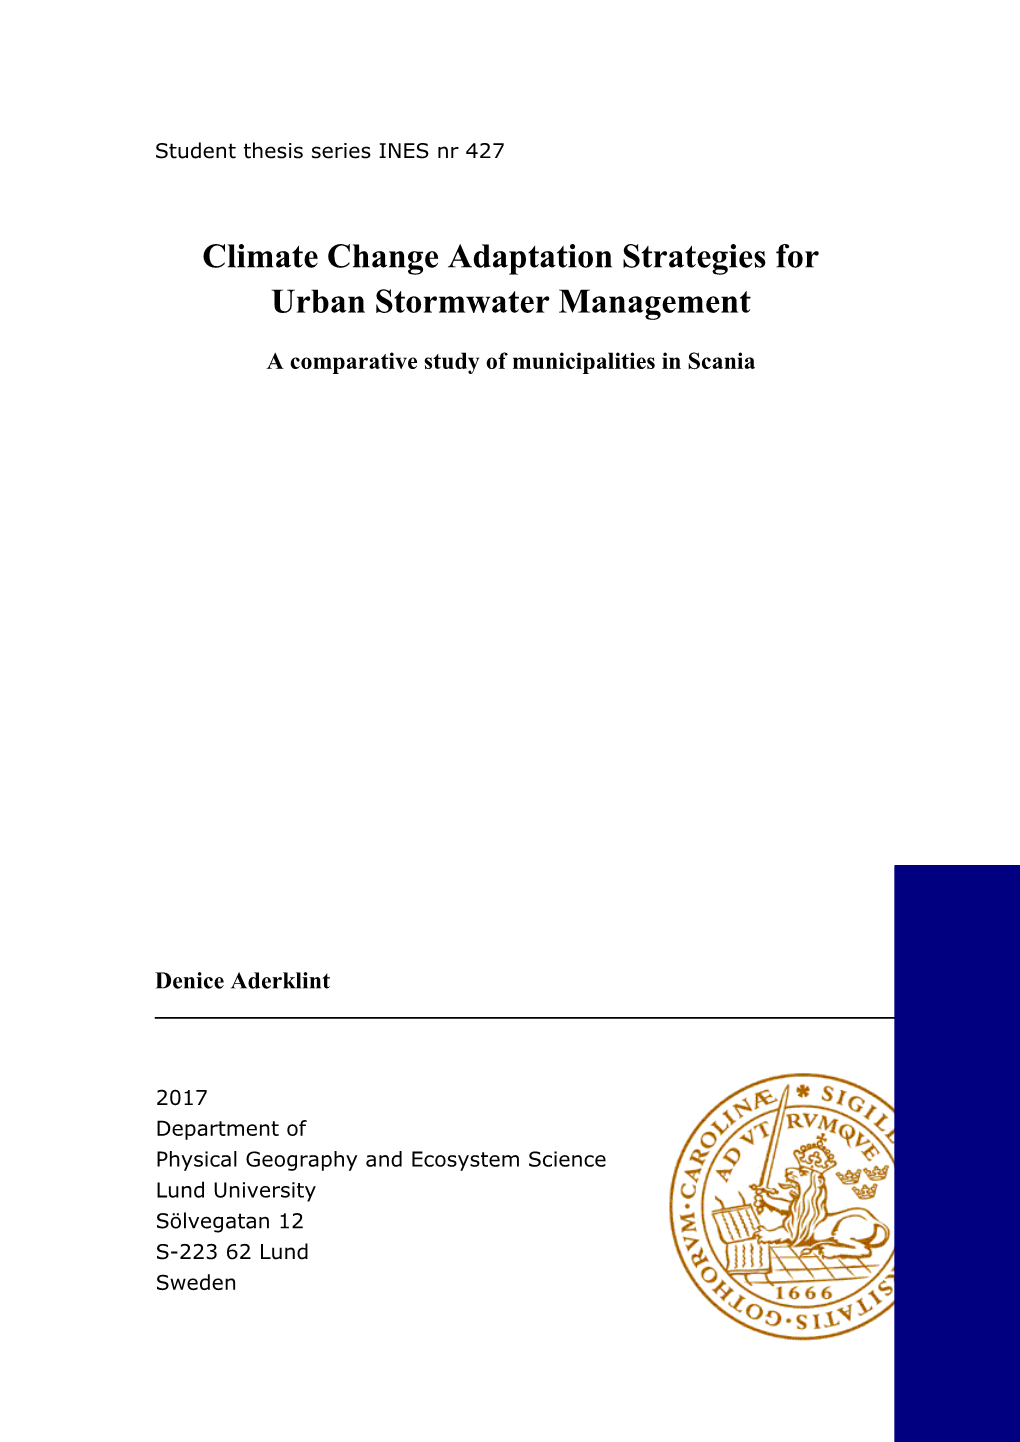 Climate Change Adaptation Strategies for Urban Stormwater Management